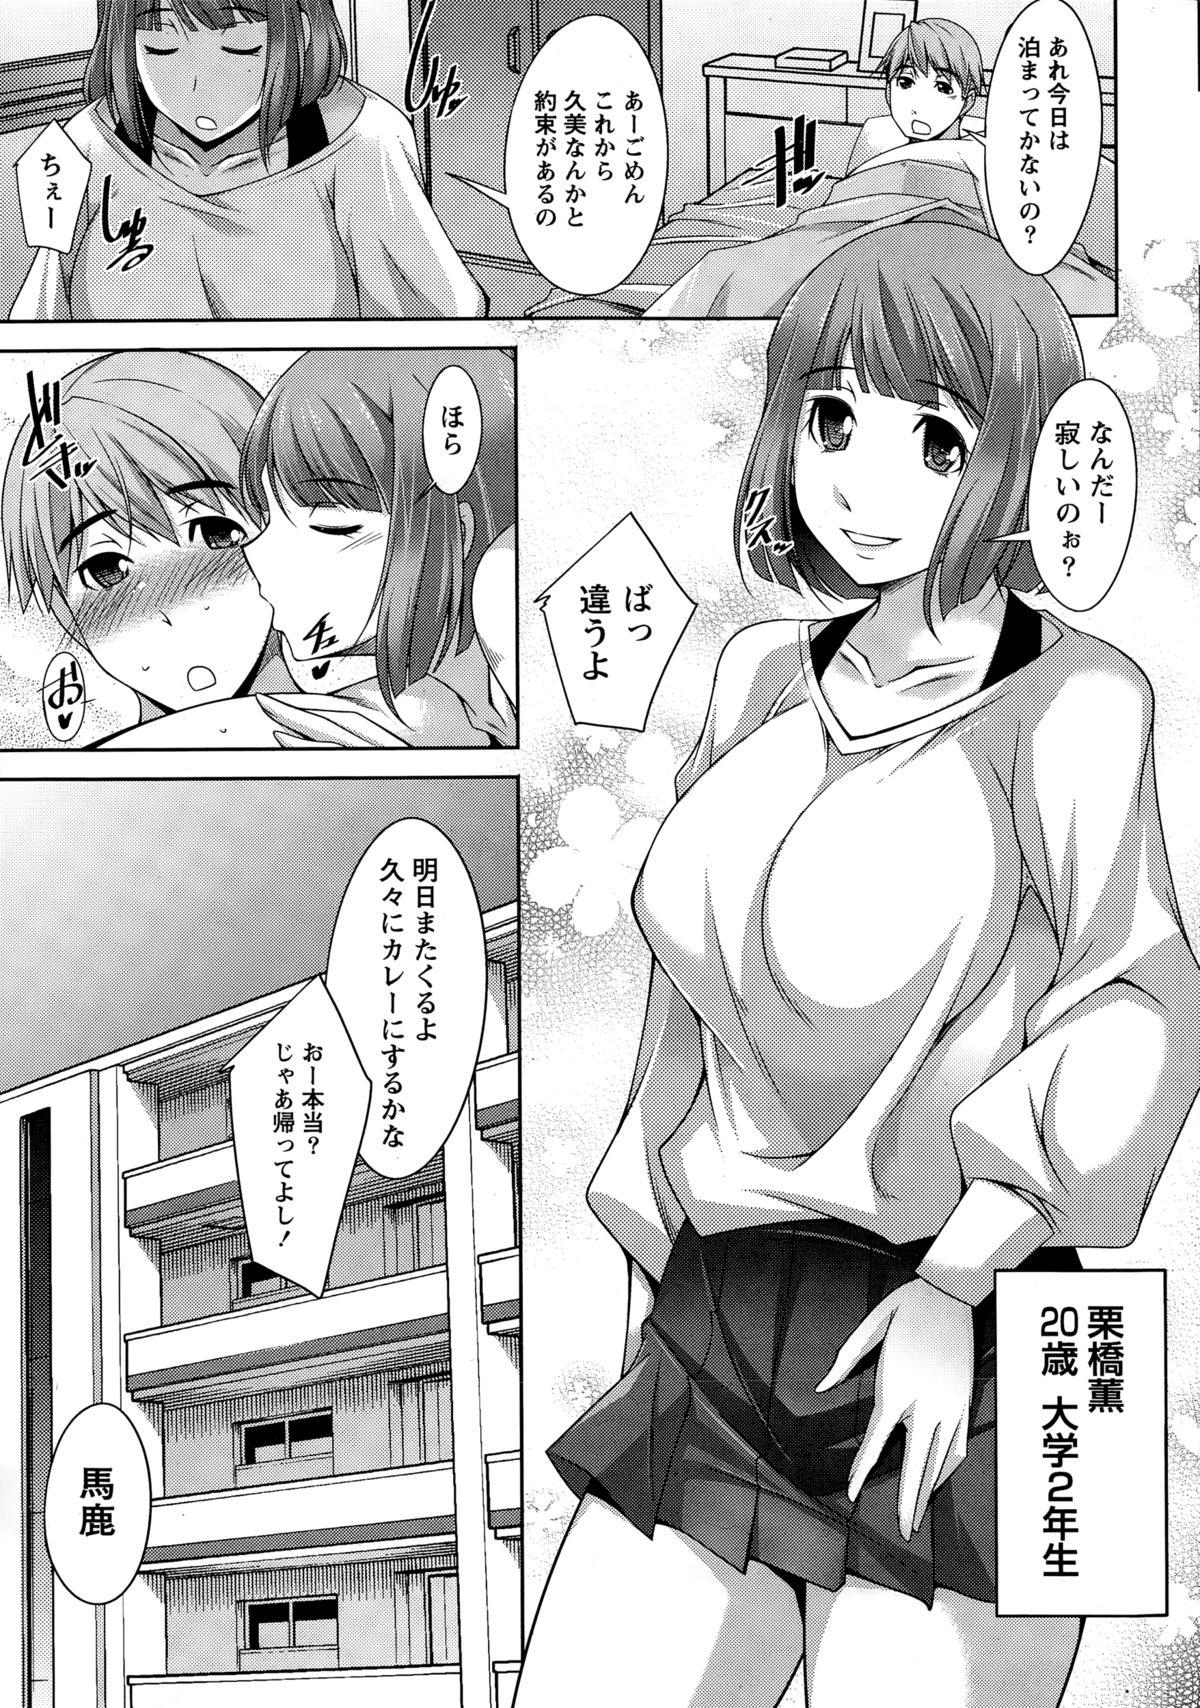 Camgirls Better Half Ch. 1-6 Rimming - Page 5